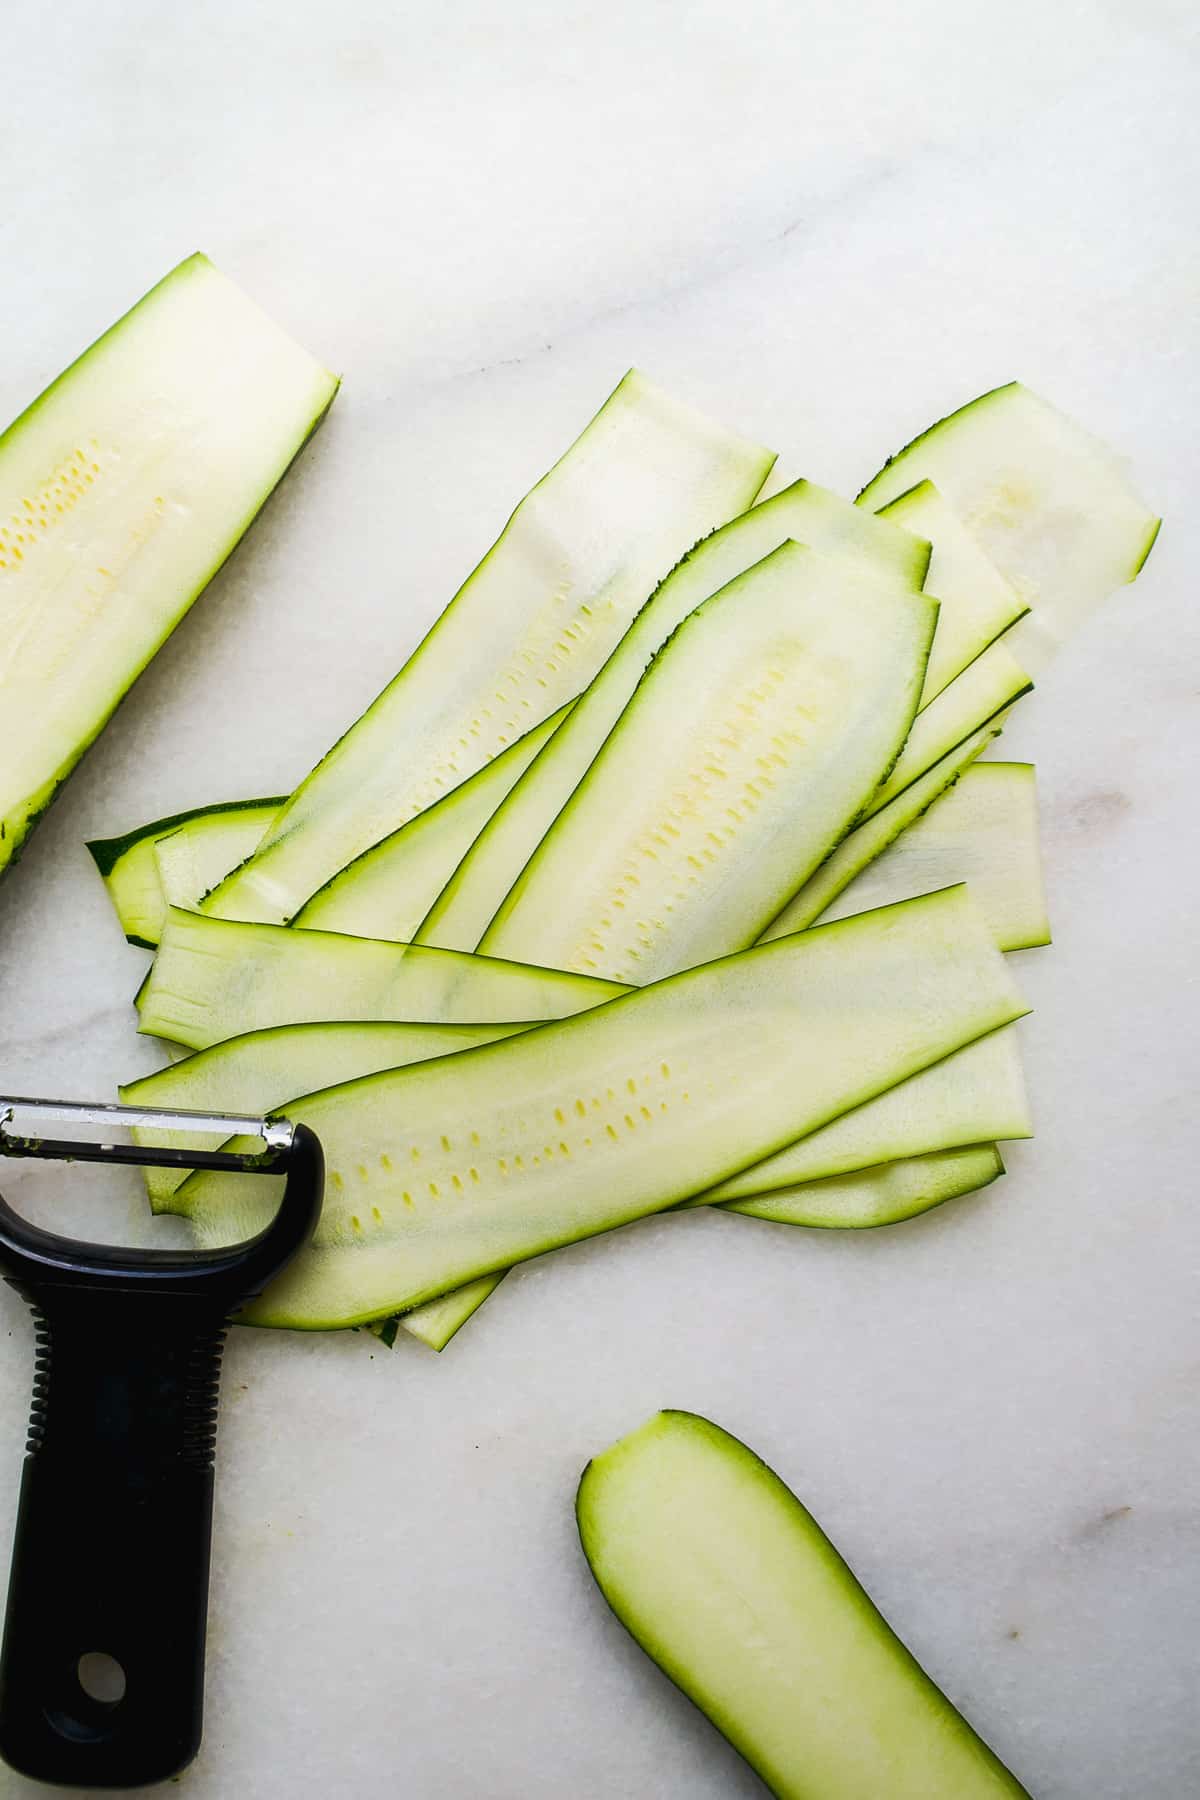 Thin slices of zucchini cut on a marble cutting board.